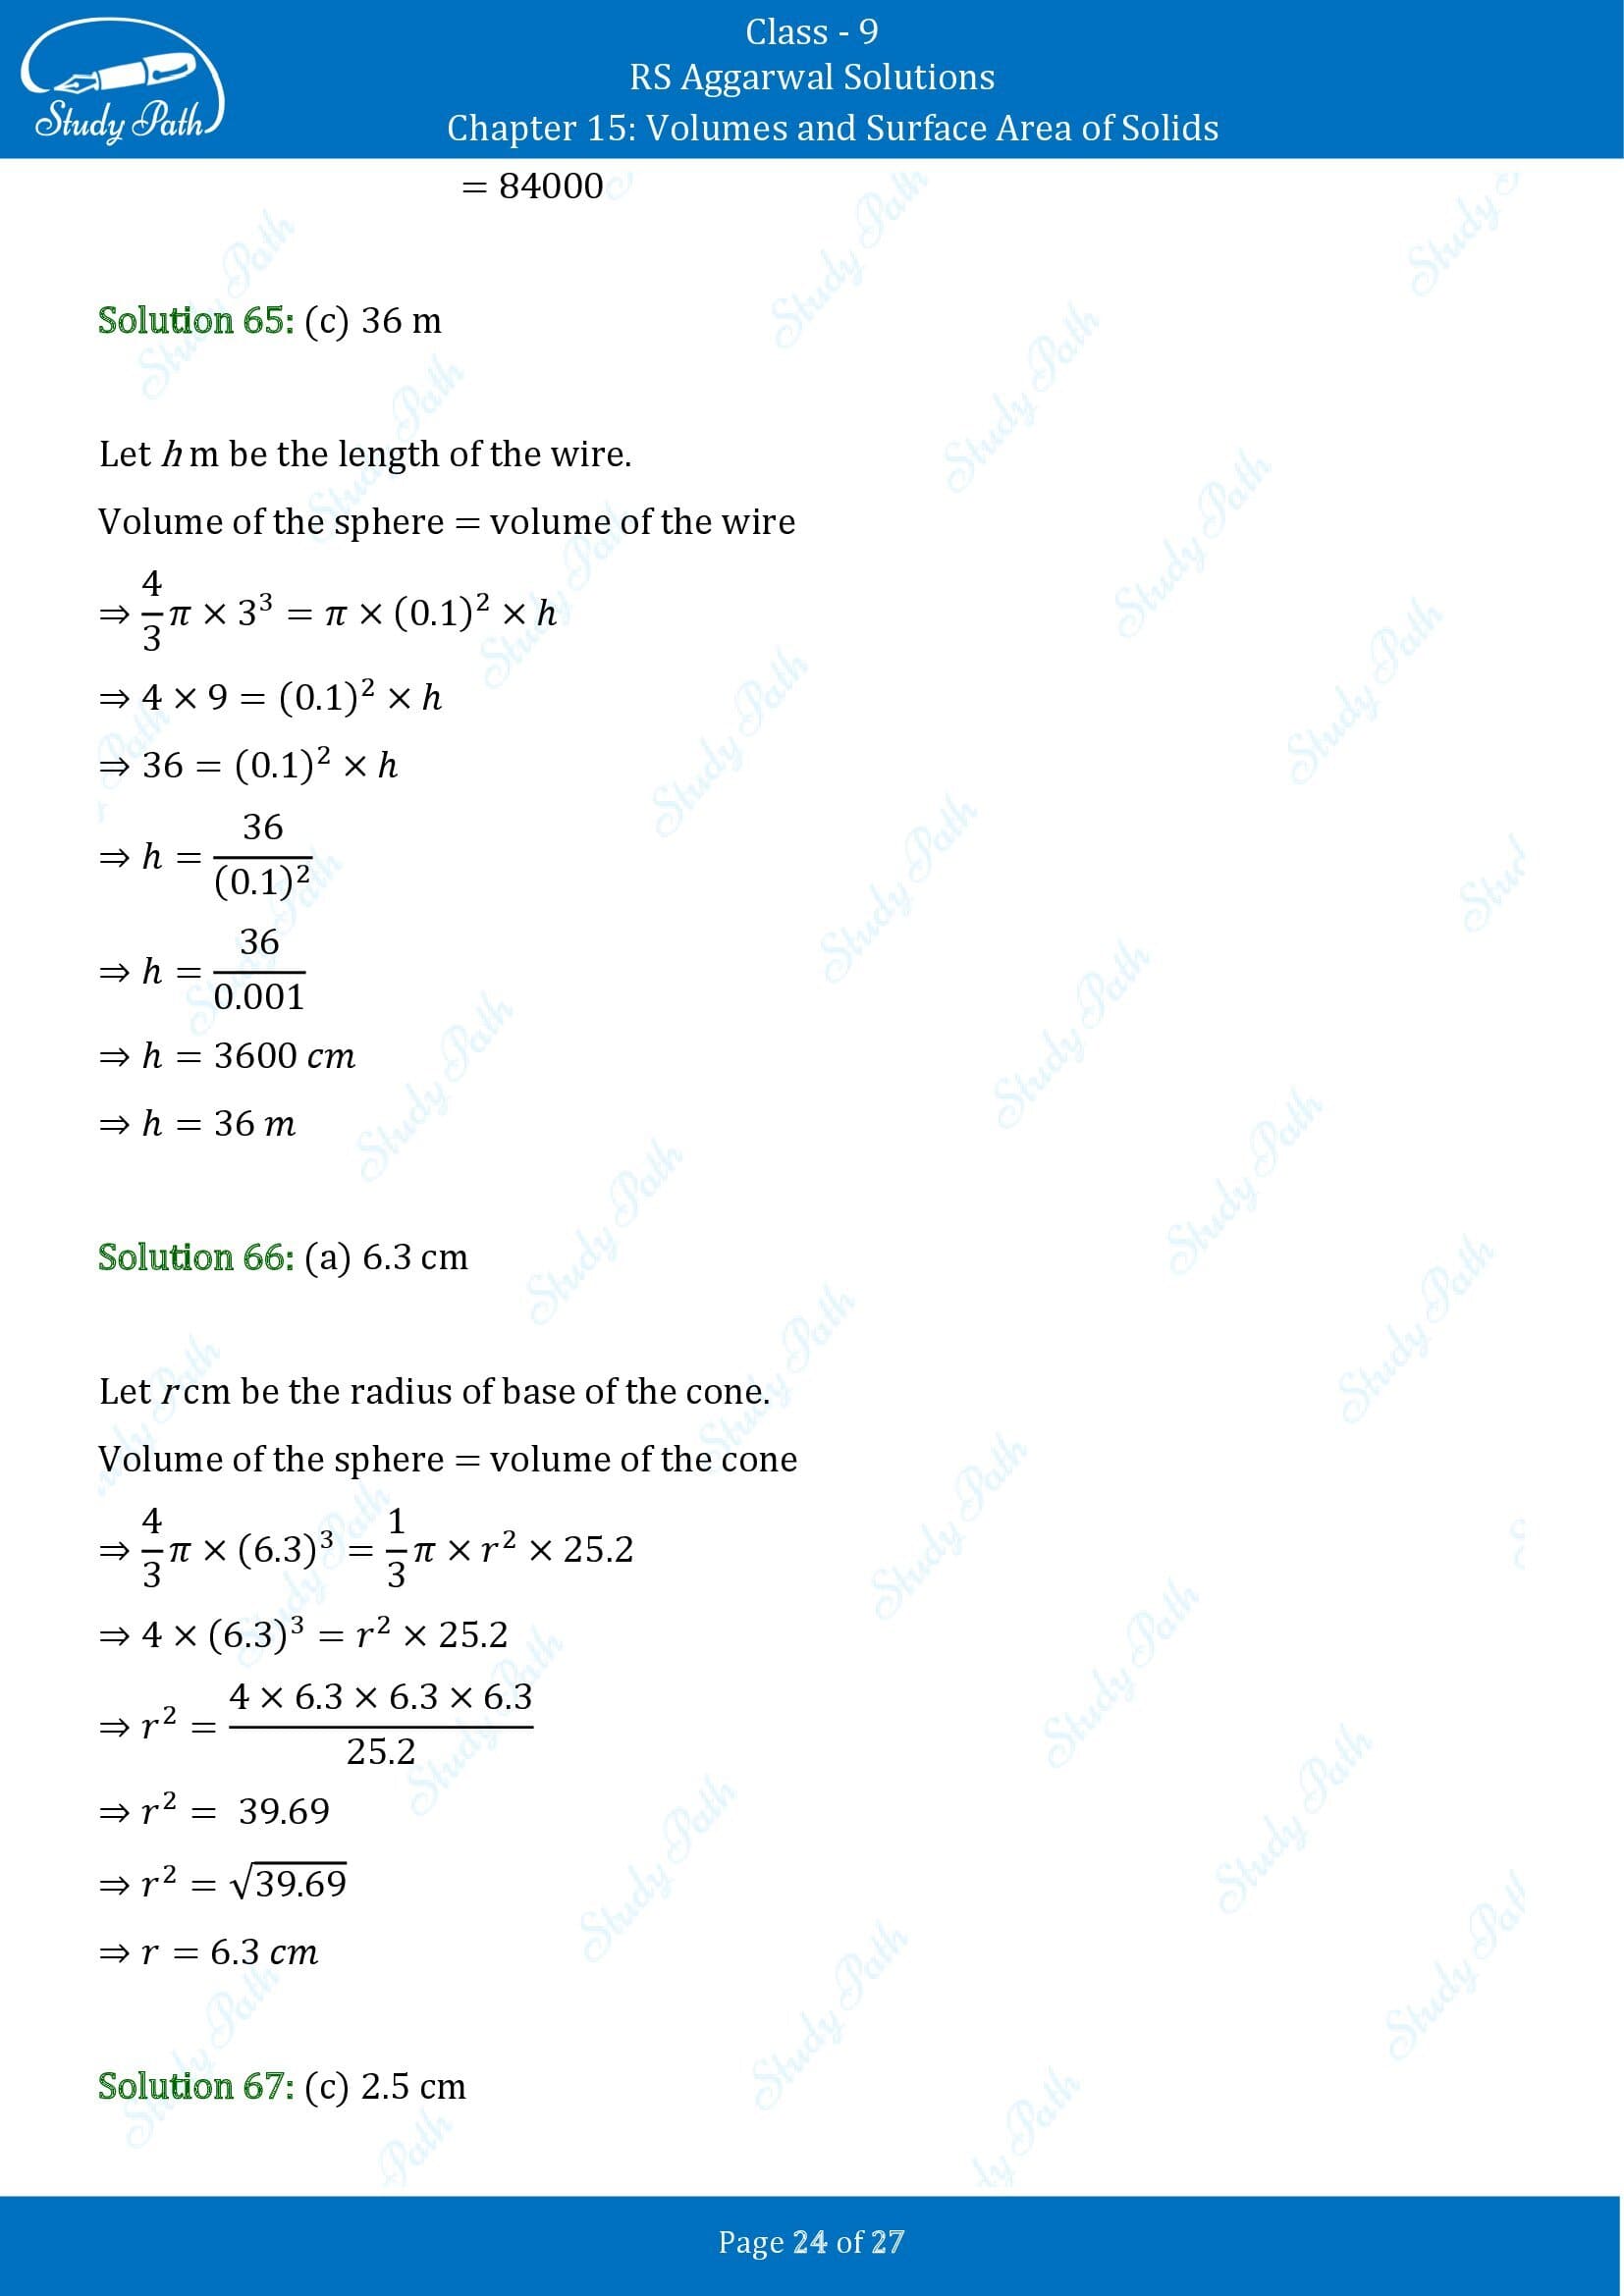 RS Aggarwal Solutions Class 9 Chapter 15 Volumes and Surface Area of Solids Multiple Choice Questions MCQs 00024